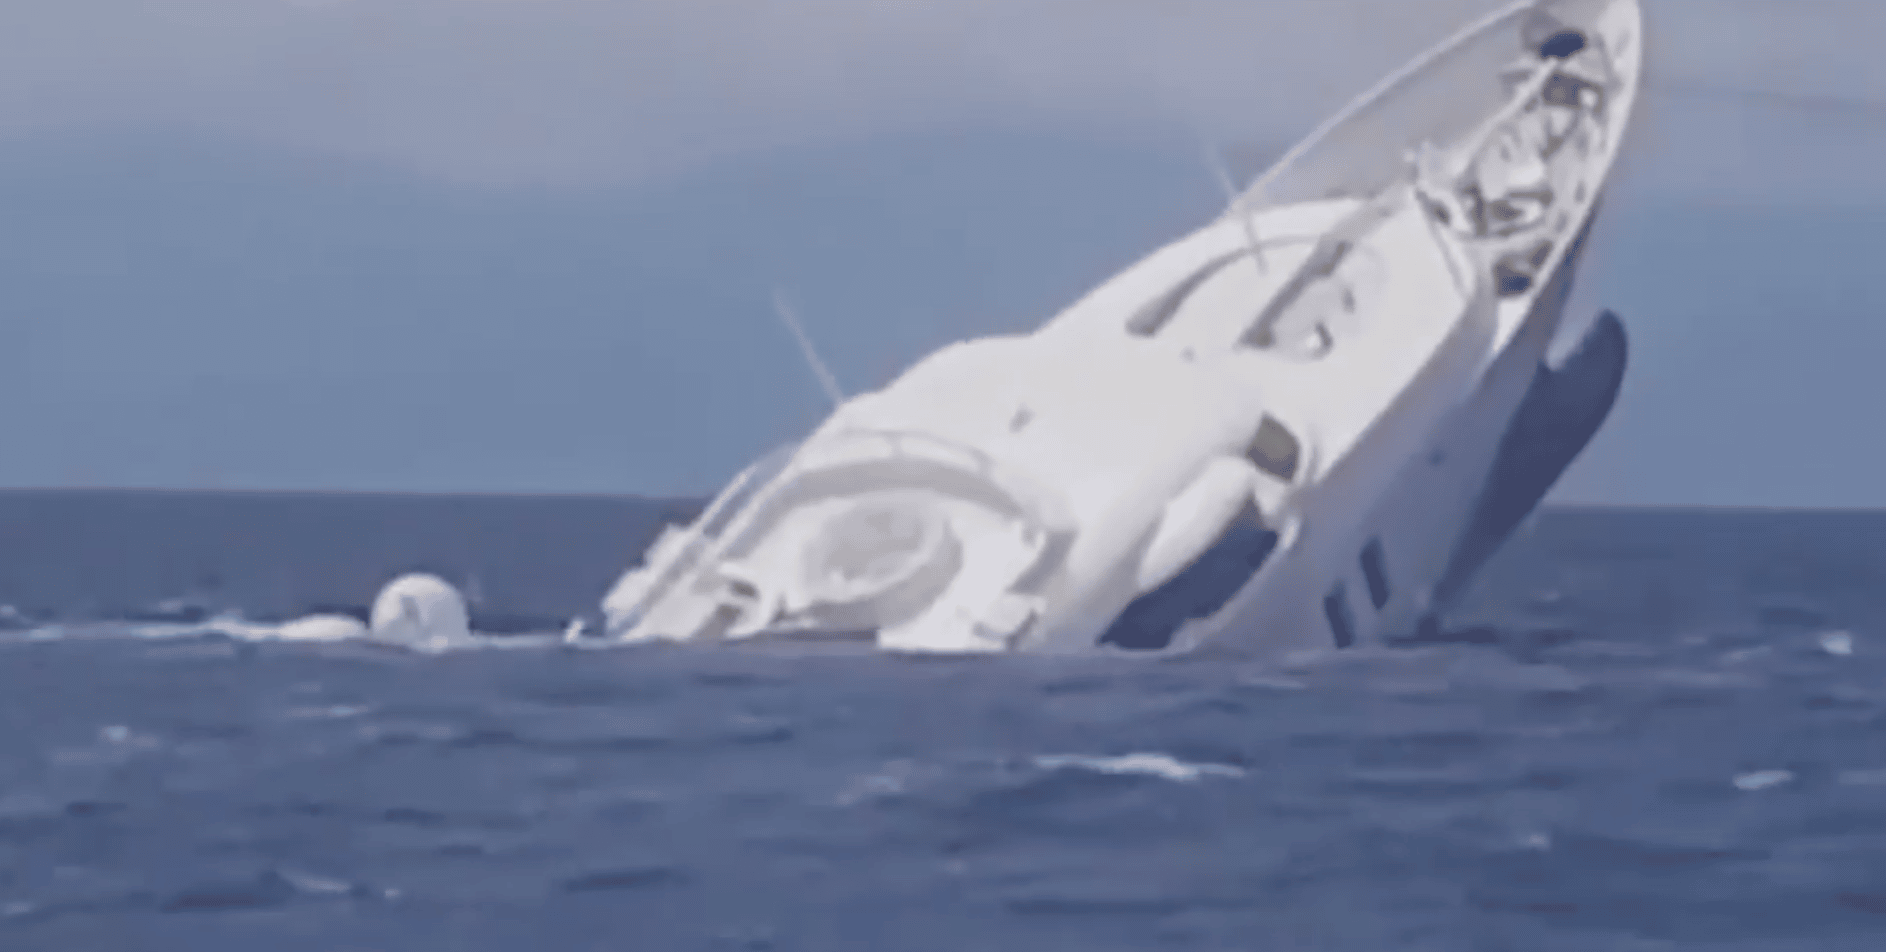 yacht sinking today